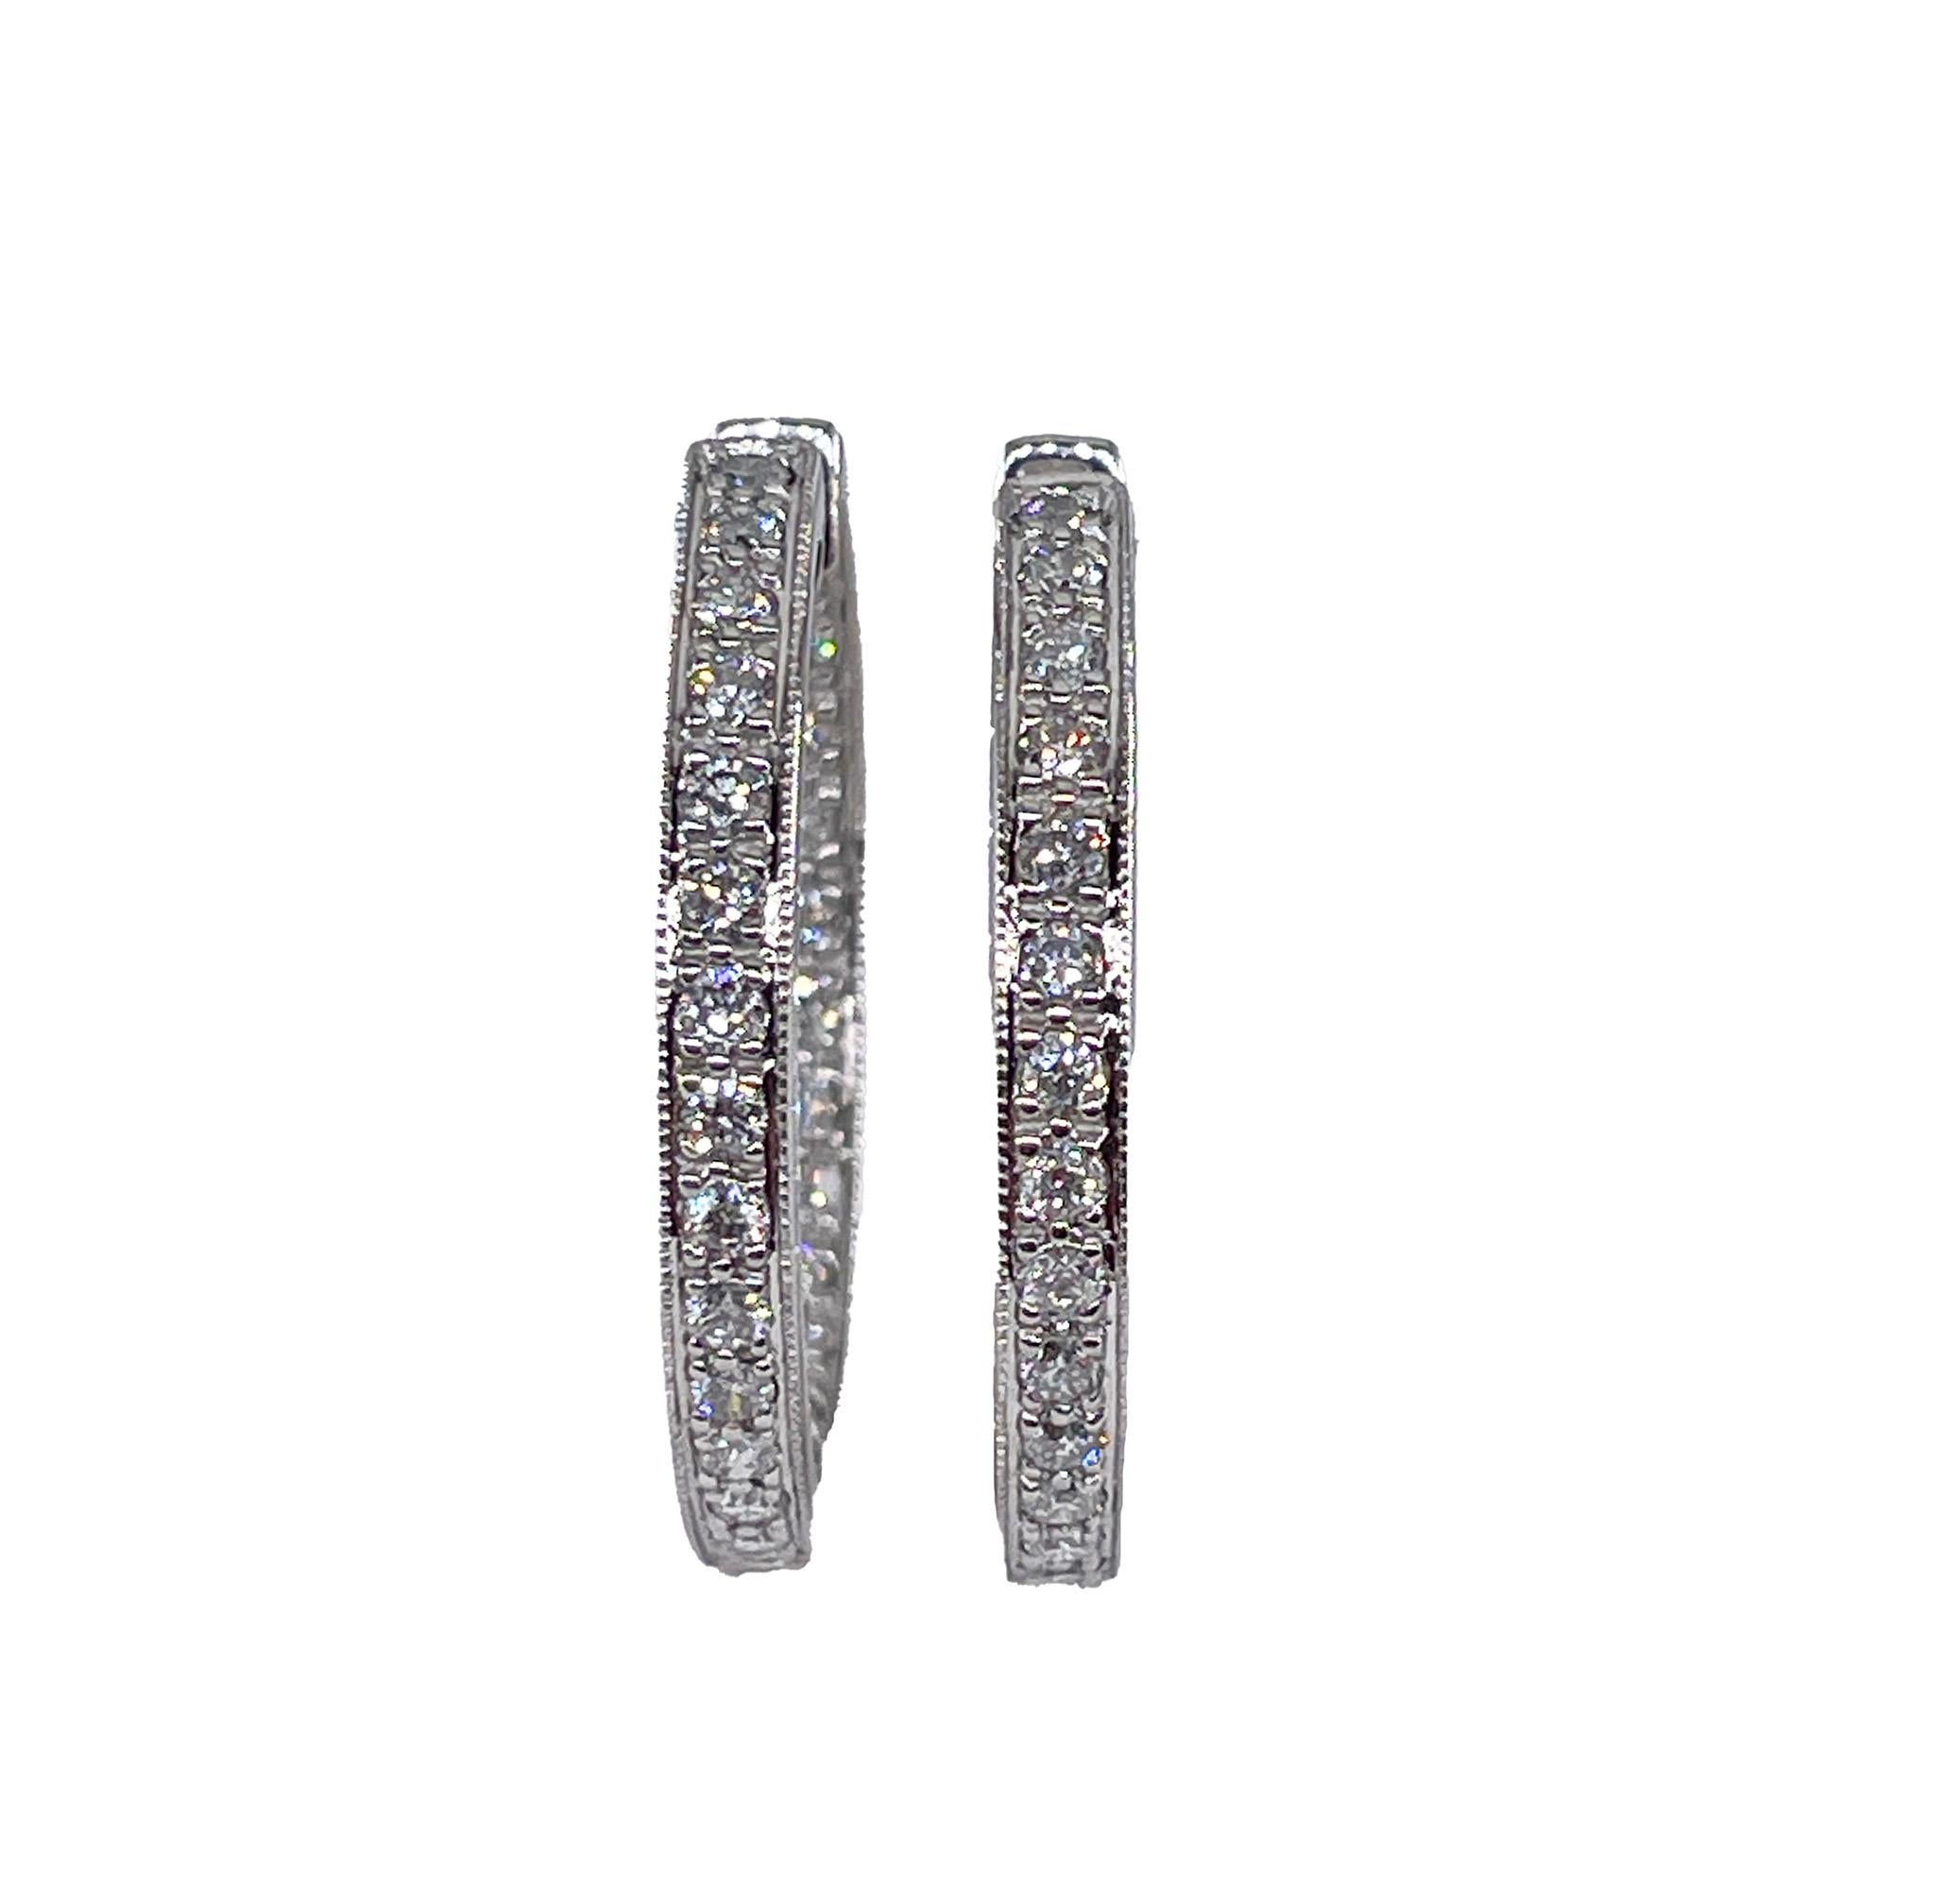 30mm Inside Out Estate Round Pave 3.0ctw Diamond 14k White Gold Hoop Earrings

This great pair will make the perfect gift: 14k white gold Round inside-out diamond hoop earrings. Quality and timeless style. From our Estate Collection. Diamond hoop